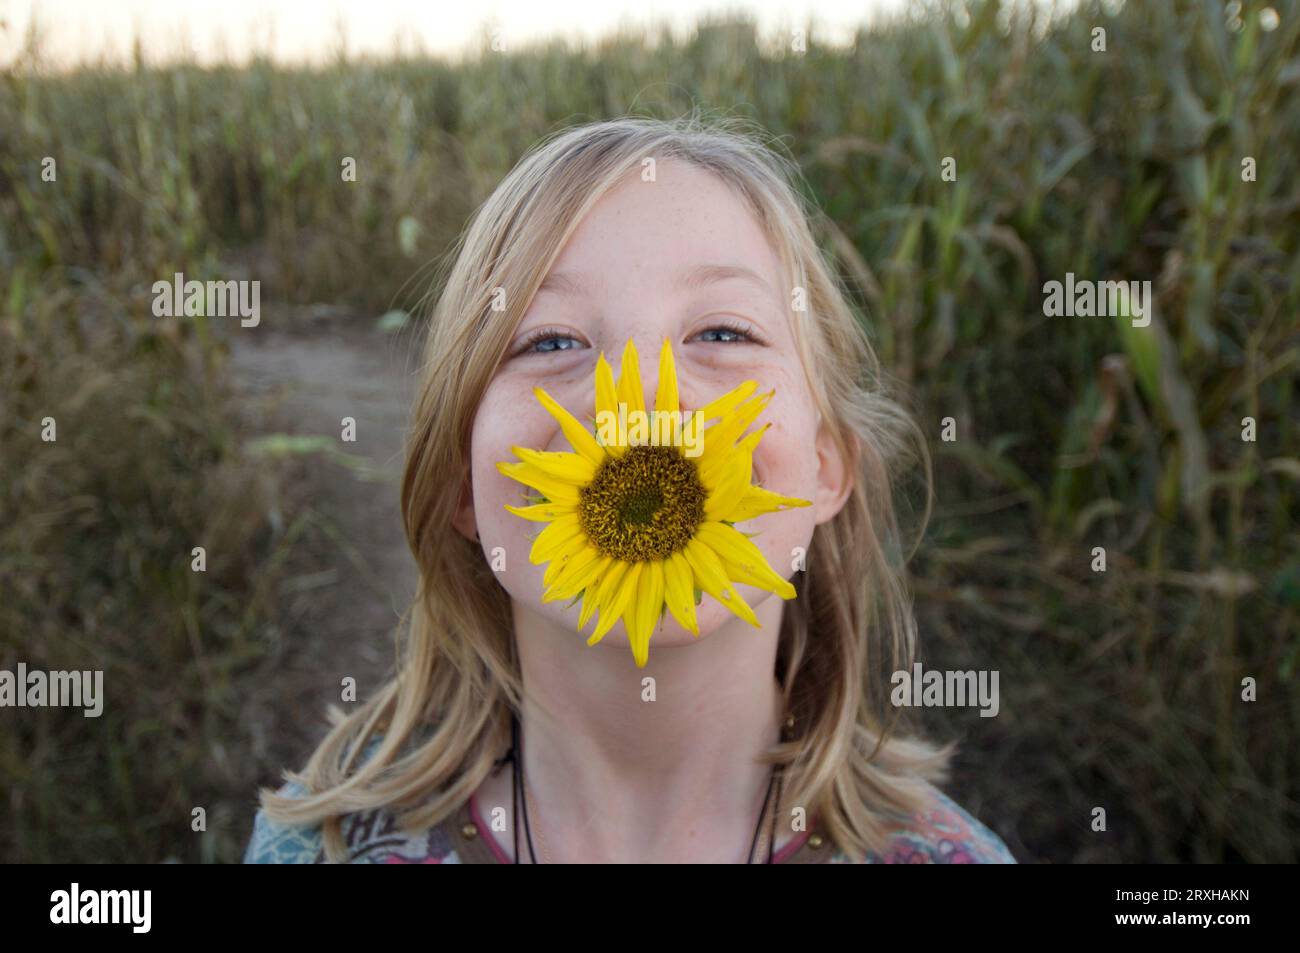 Young girl plays with a sunflower (Helianthus annuus) in a farm field; Roca, Nebraska, United States of America Stock Photo